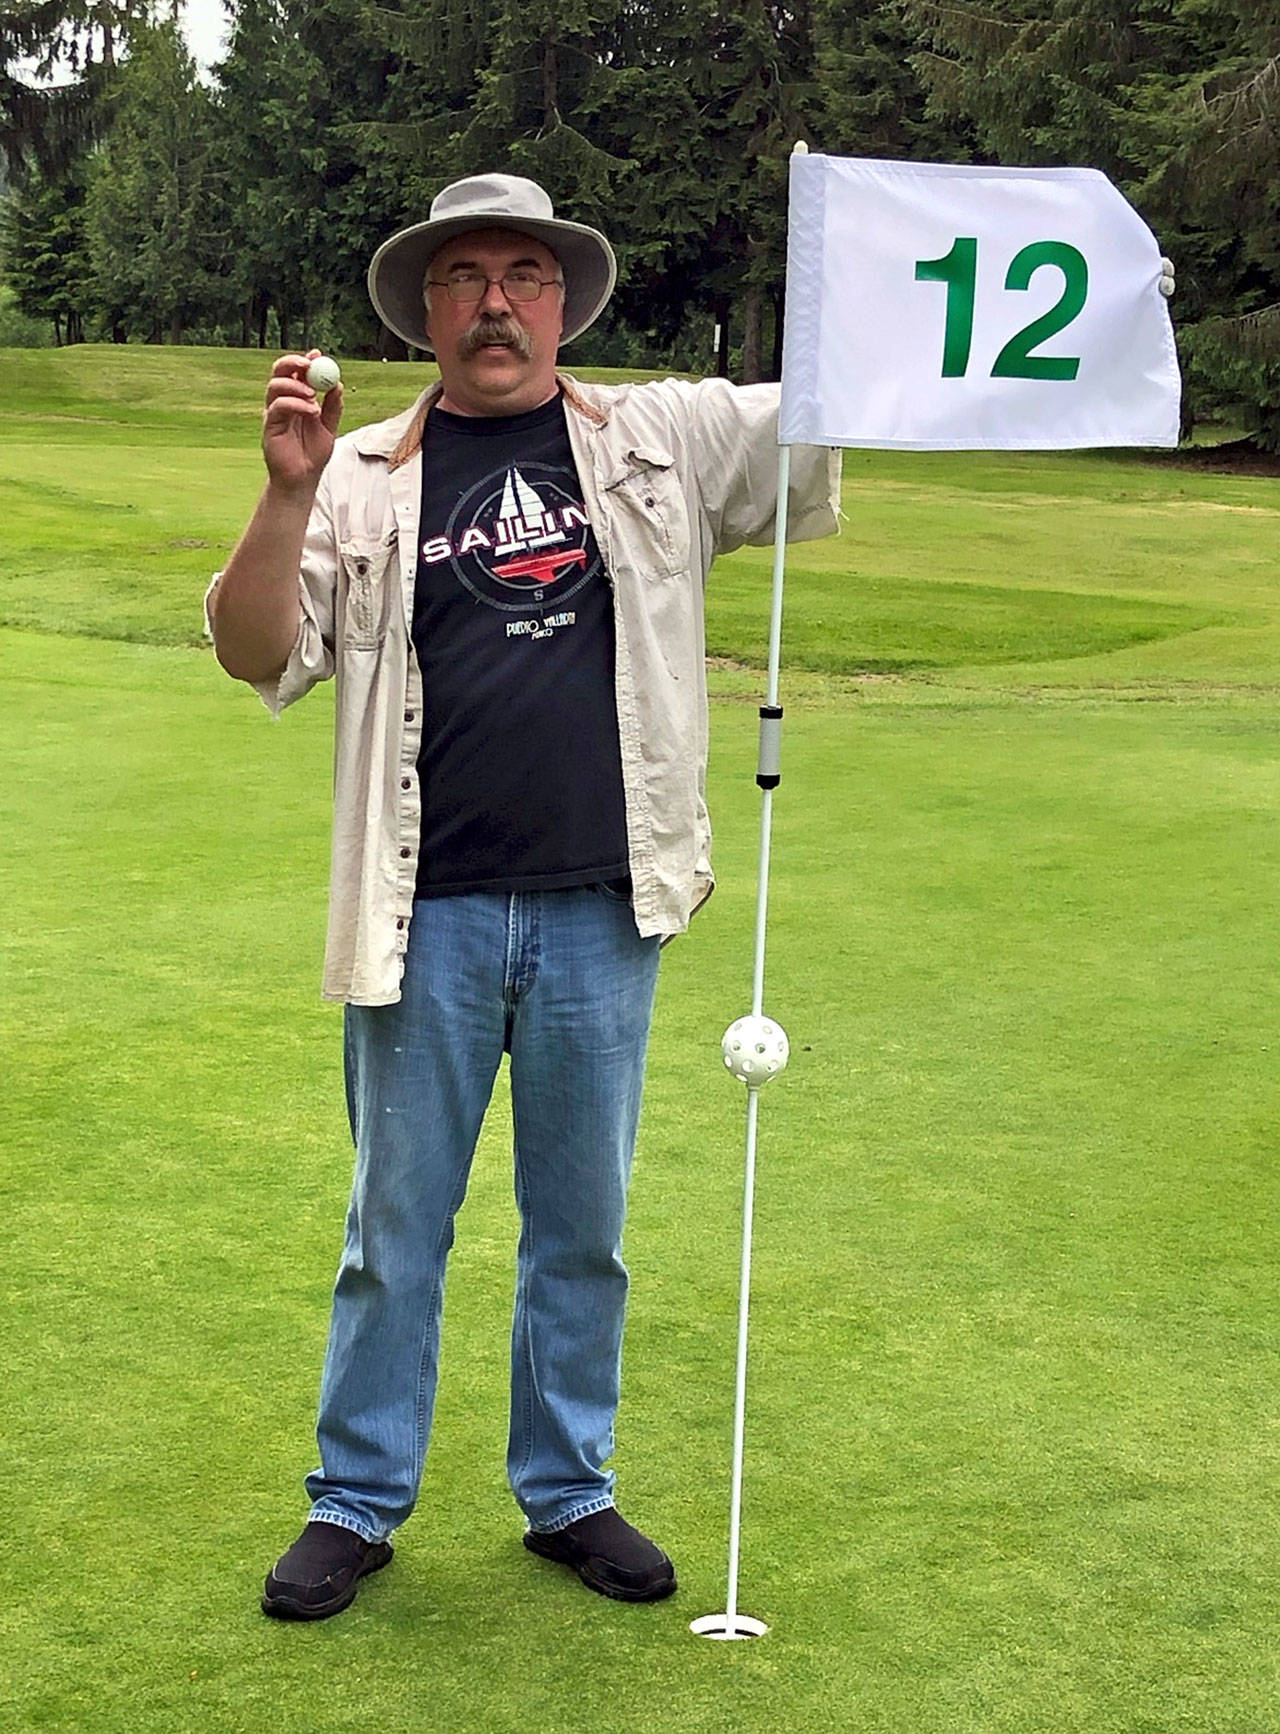 Eric Rydman poses for a photos after shooting an ace on the 12th hole on Thursday at Highland Golf Course. Rydman used a 9-iron to make the 120-yard shot. (Submitted photo)